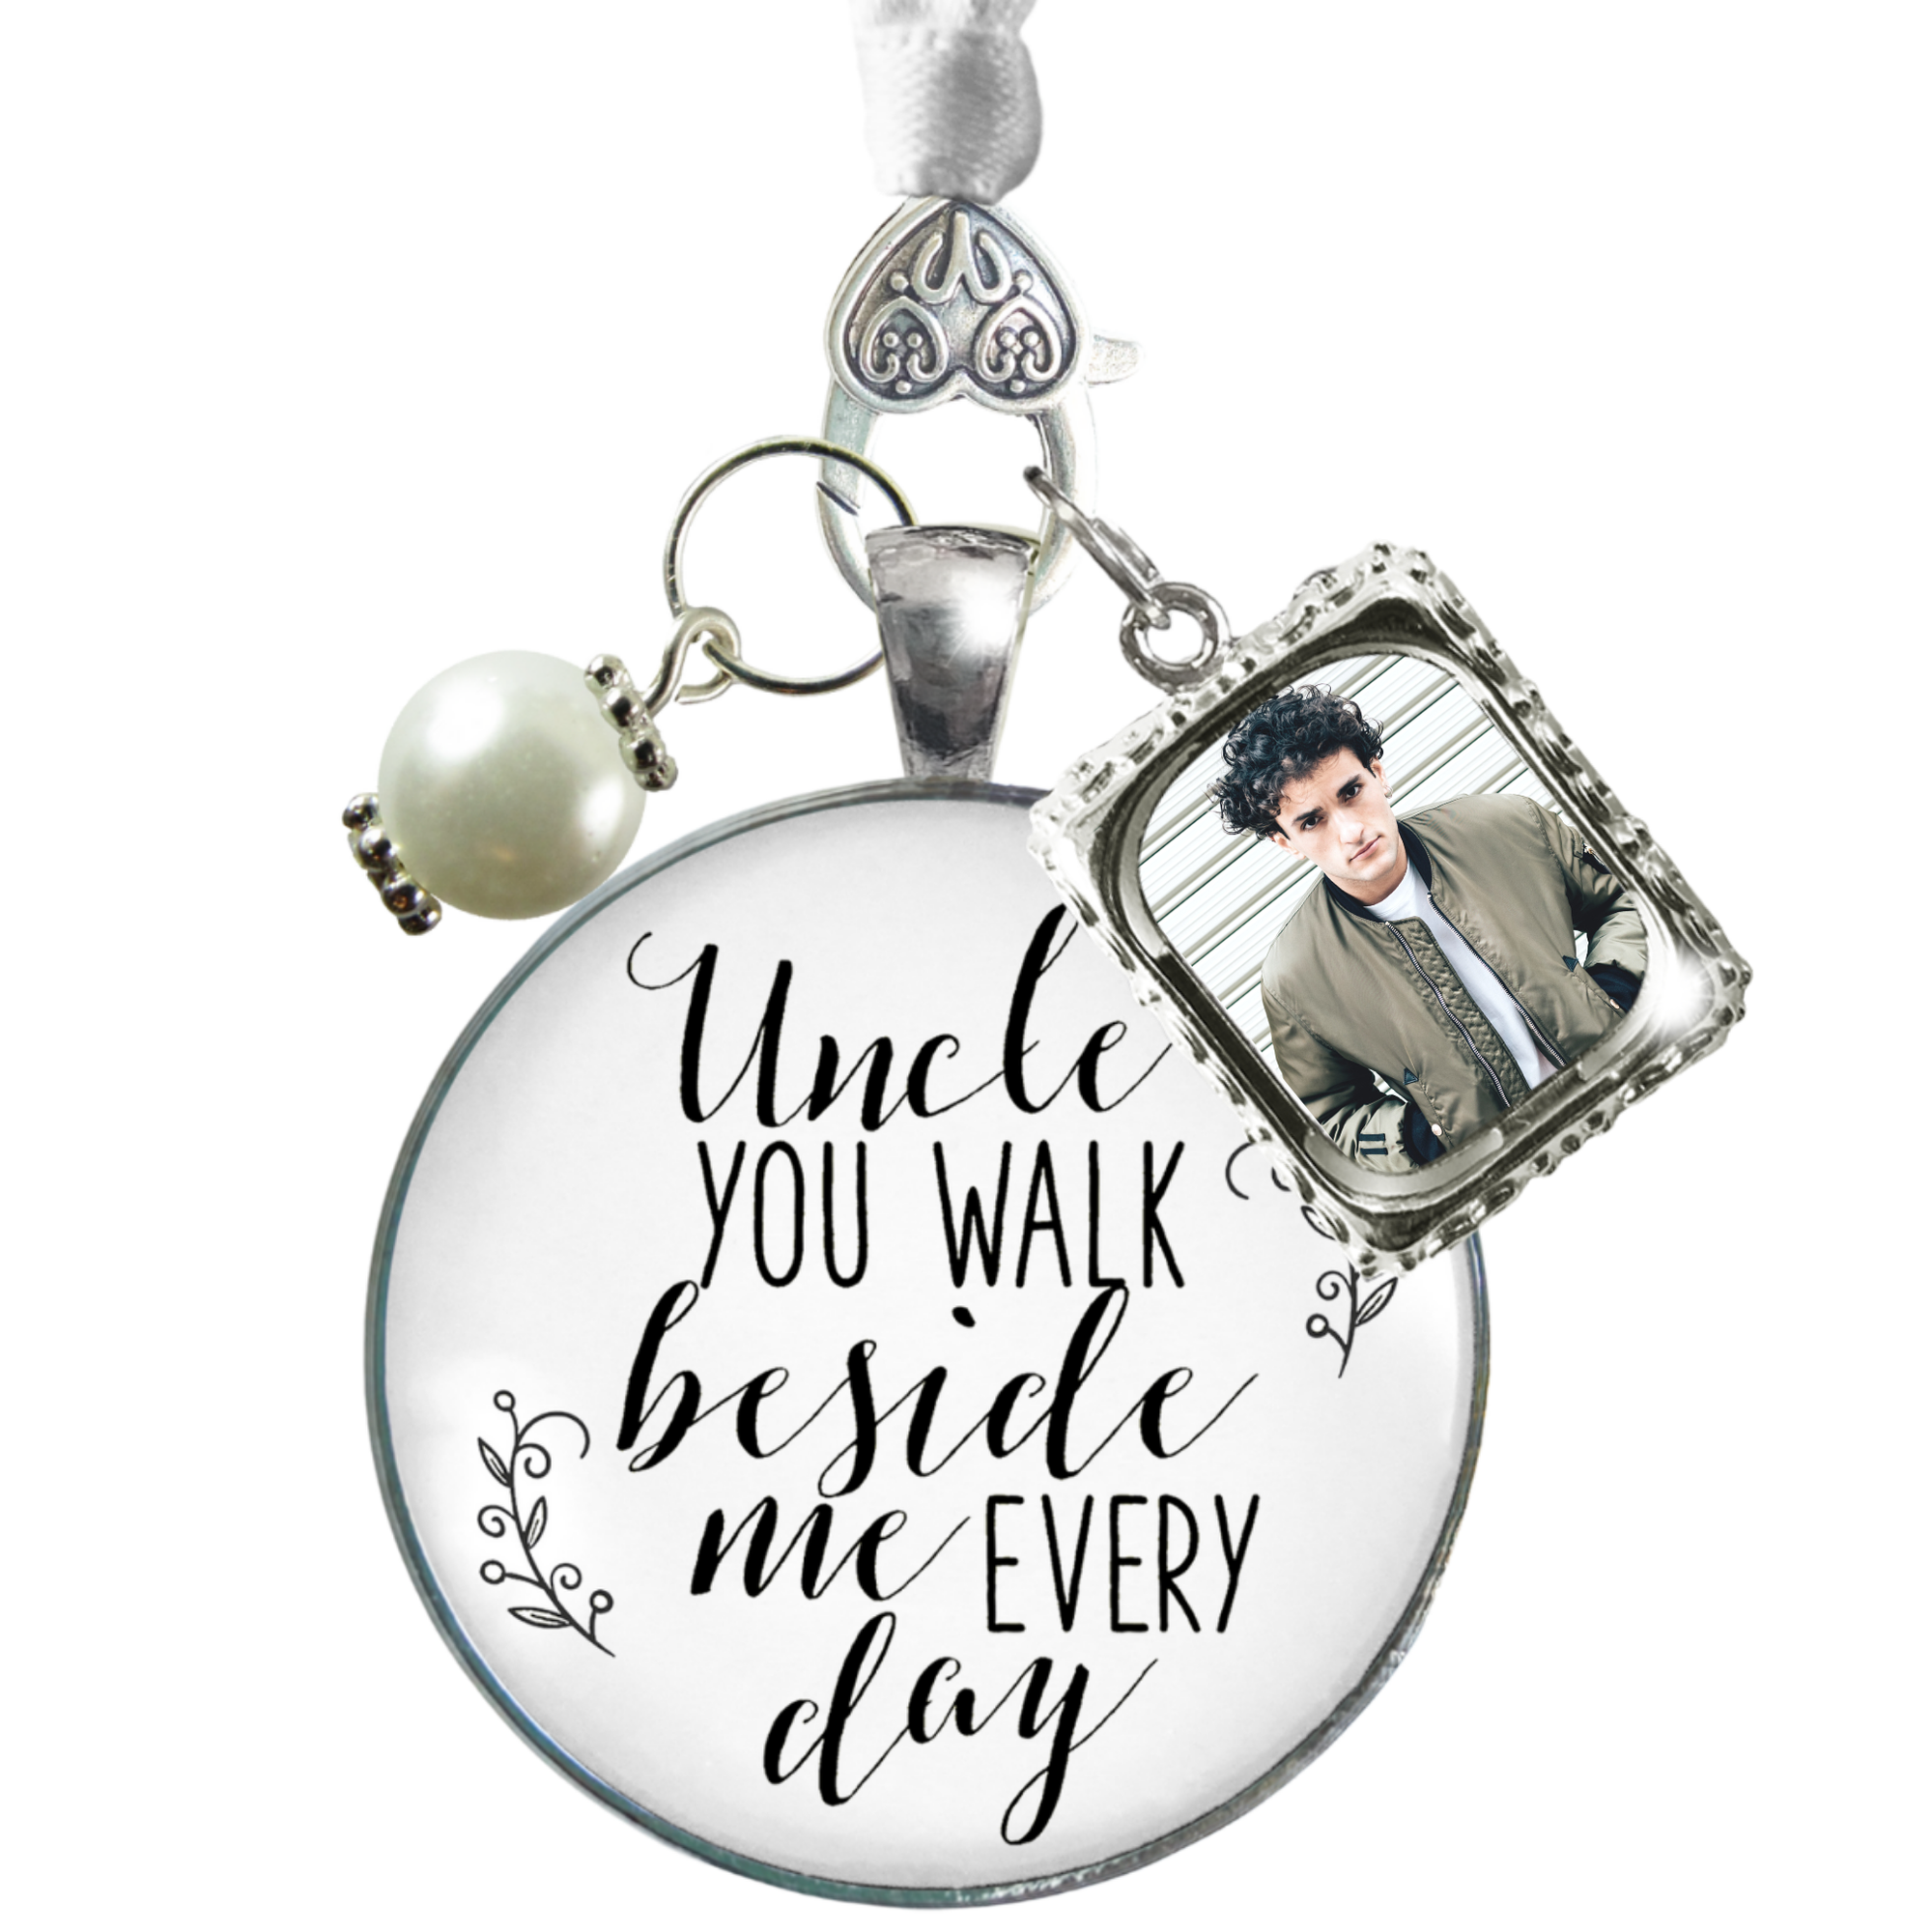 Bouquet Charm Customize Uncle You Walk Beside Me Every Day Wedding Day Jewelry Memory Vintage Silvertone Glass Pendant  Loving Memorial on Bride's Flowers DIY Photo Template  Bouquet Charm - Gutsy Goodness Handmade Jewelry